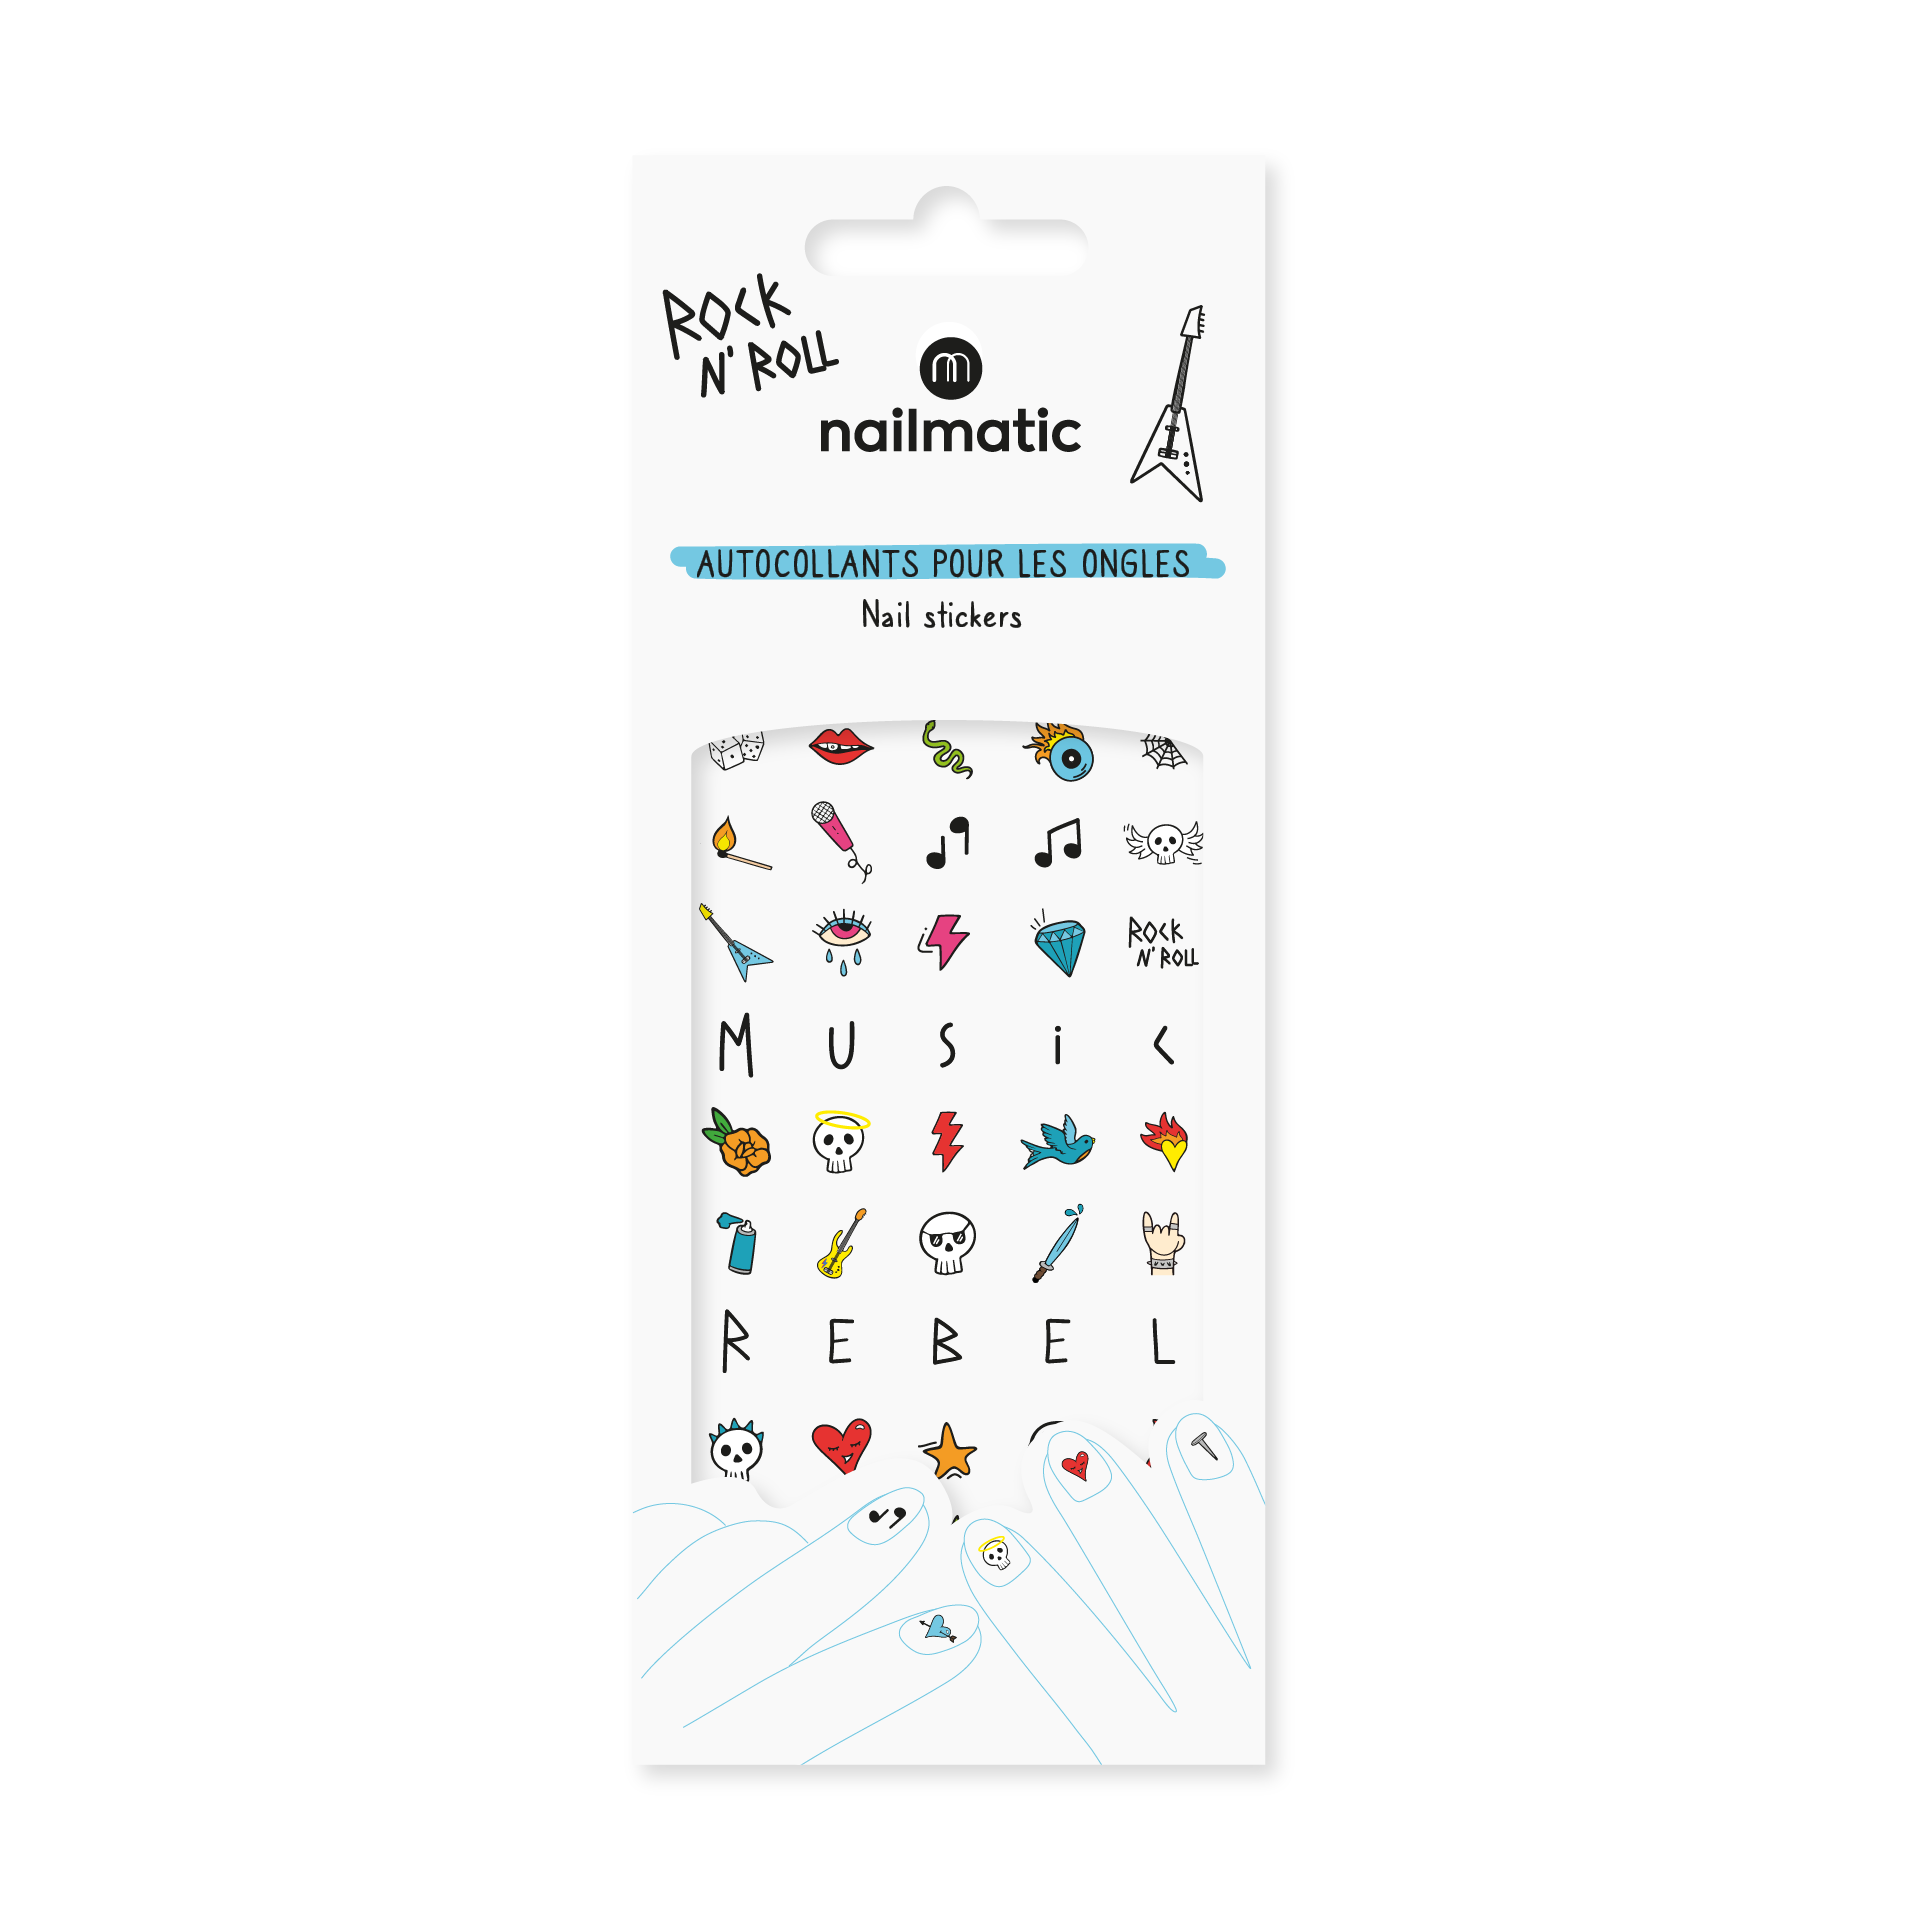 55 stickers ongles Rock avec packaging